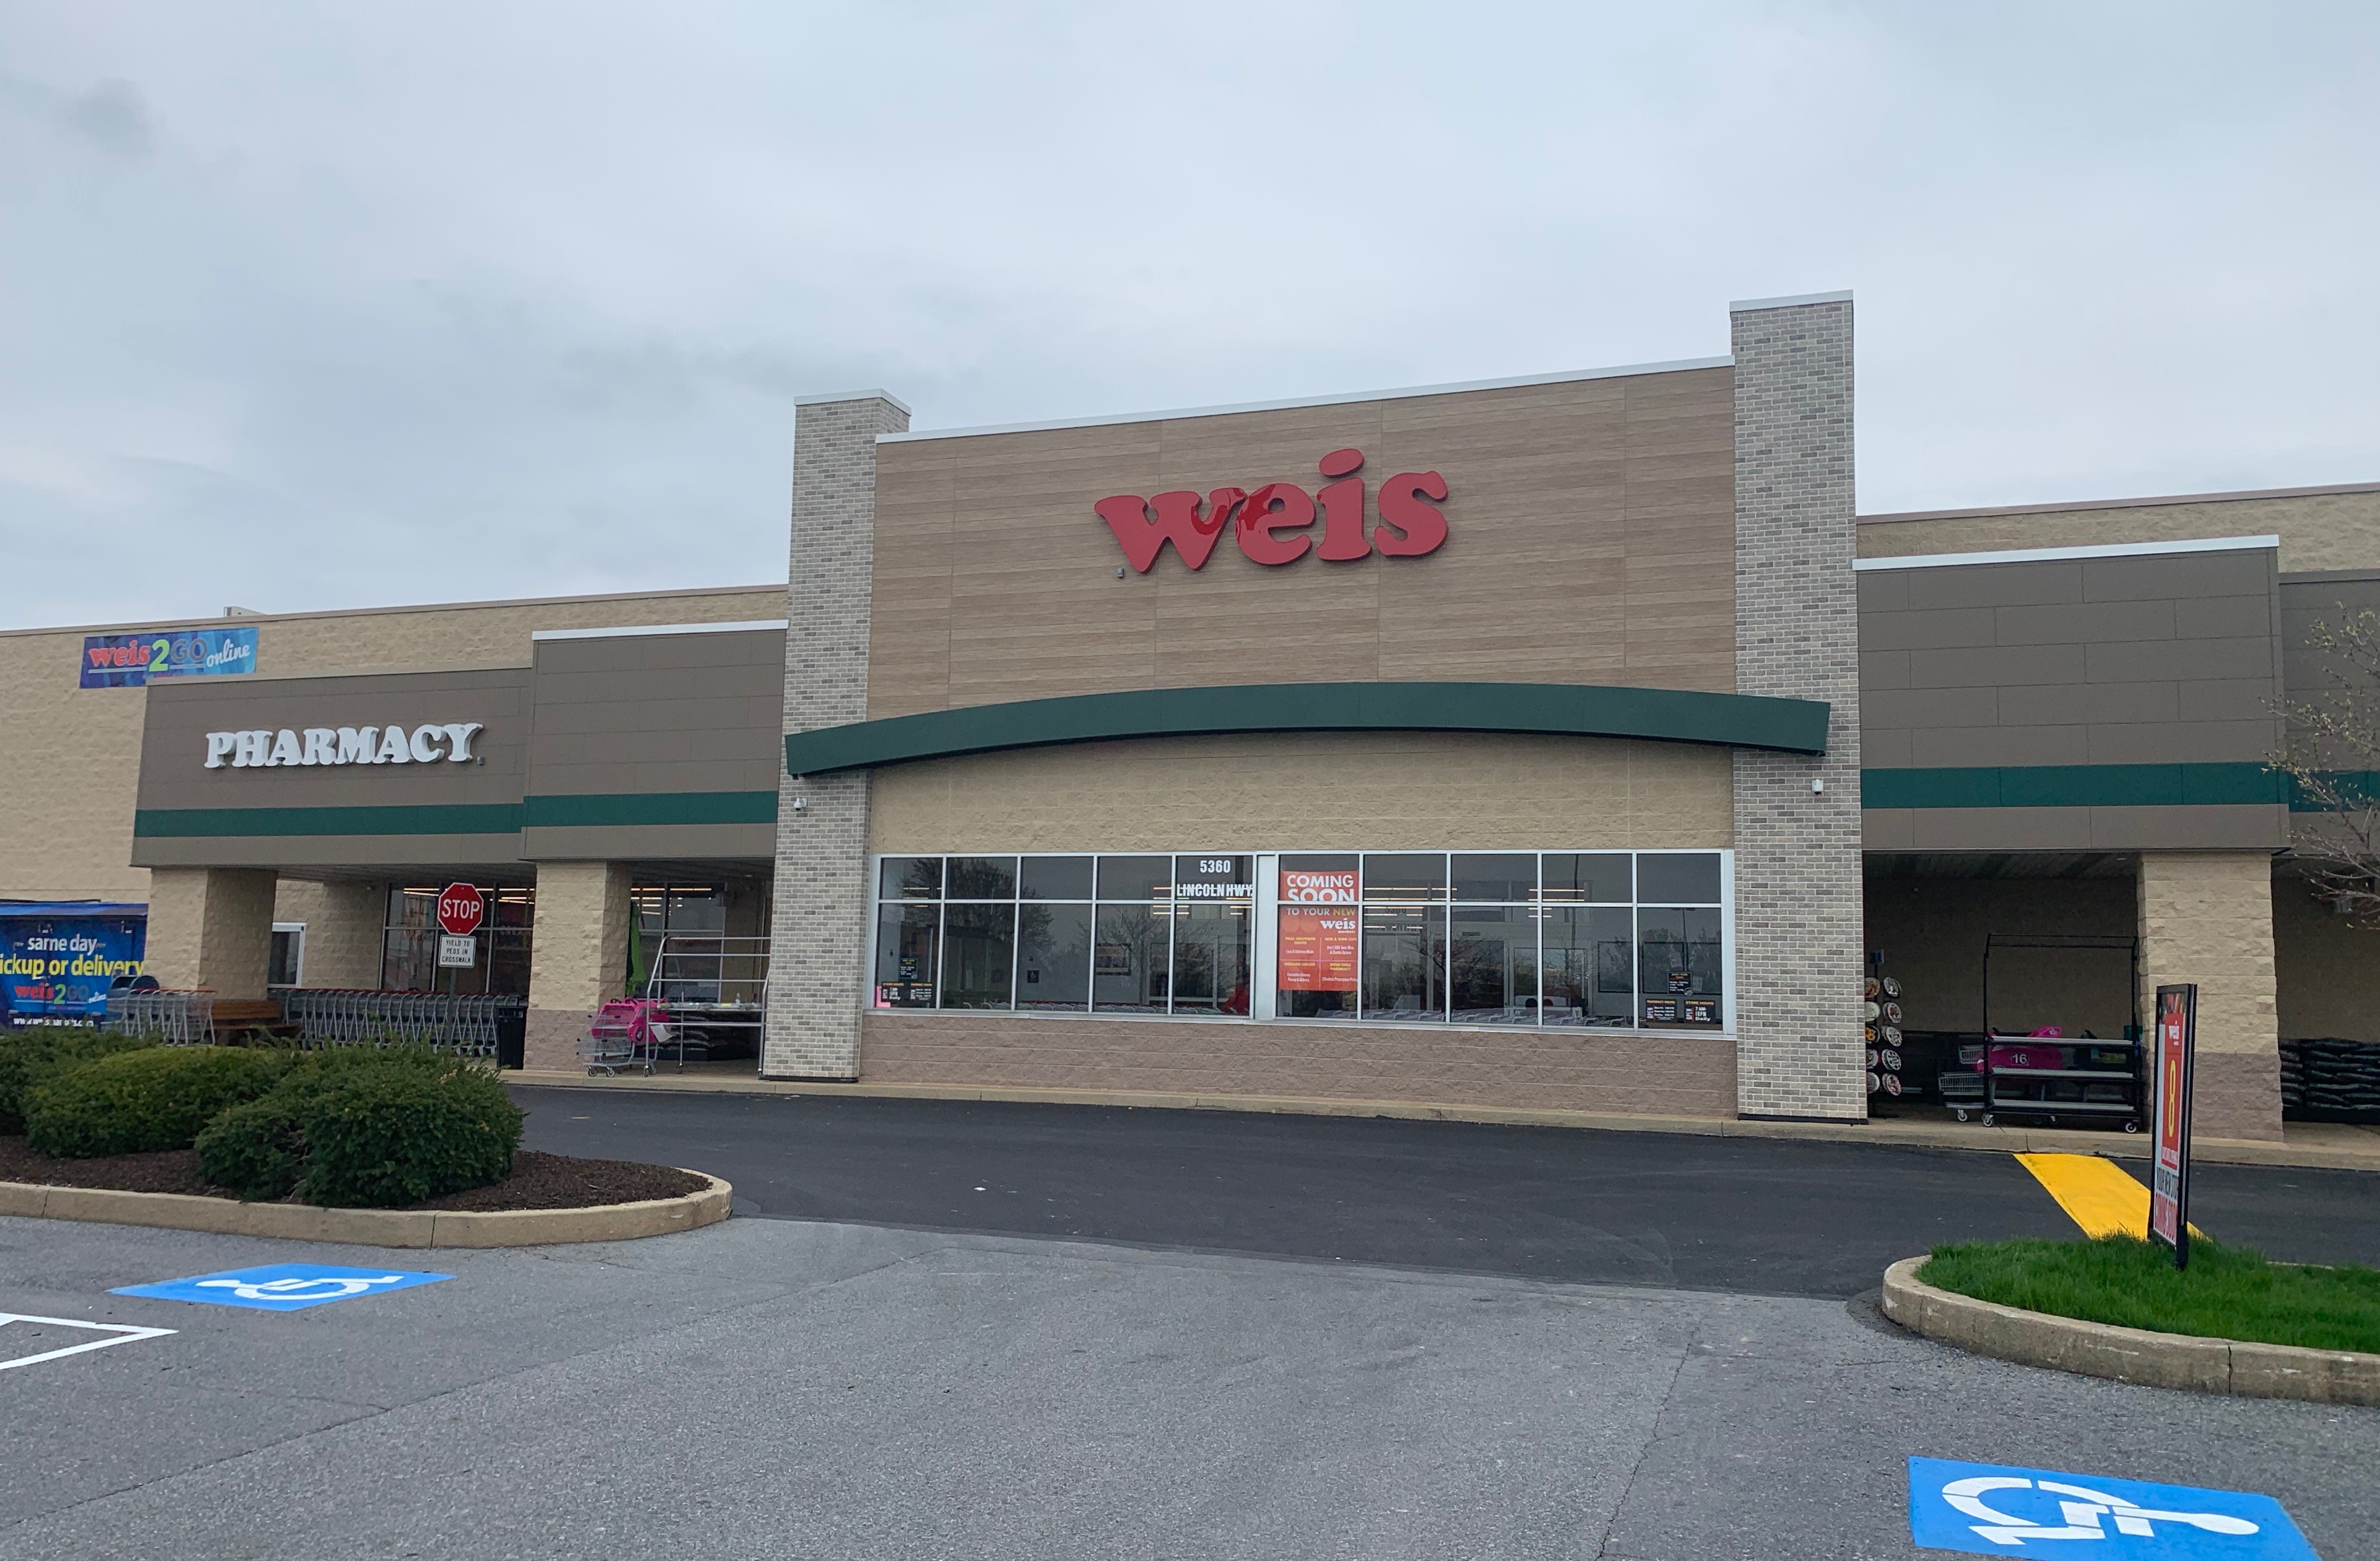 Weis Markets - Don't let those precious holiday leftovers